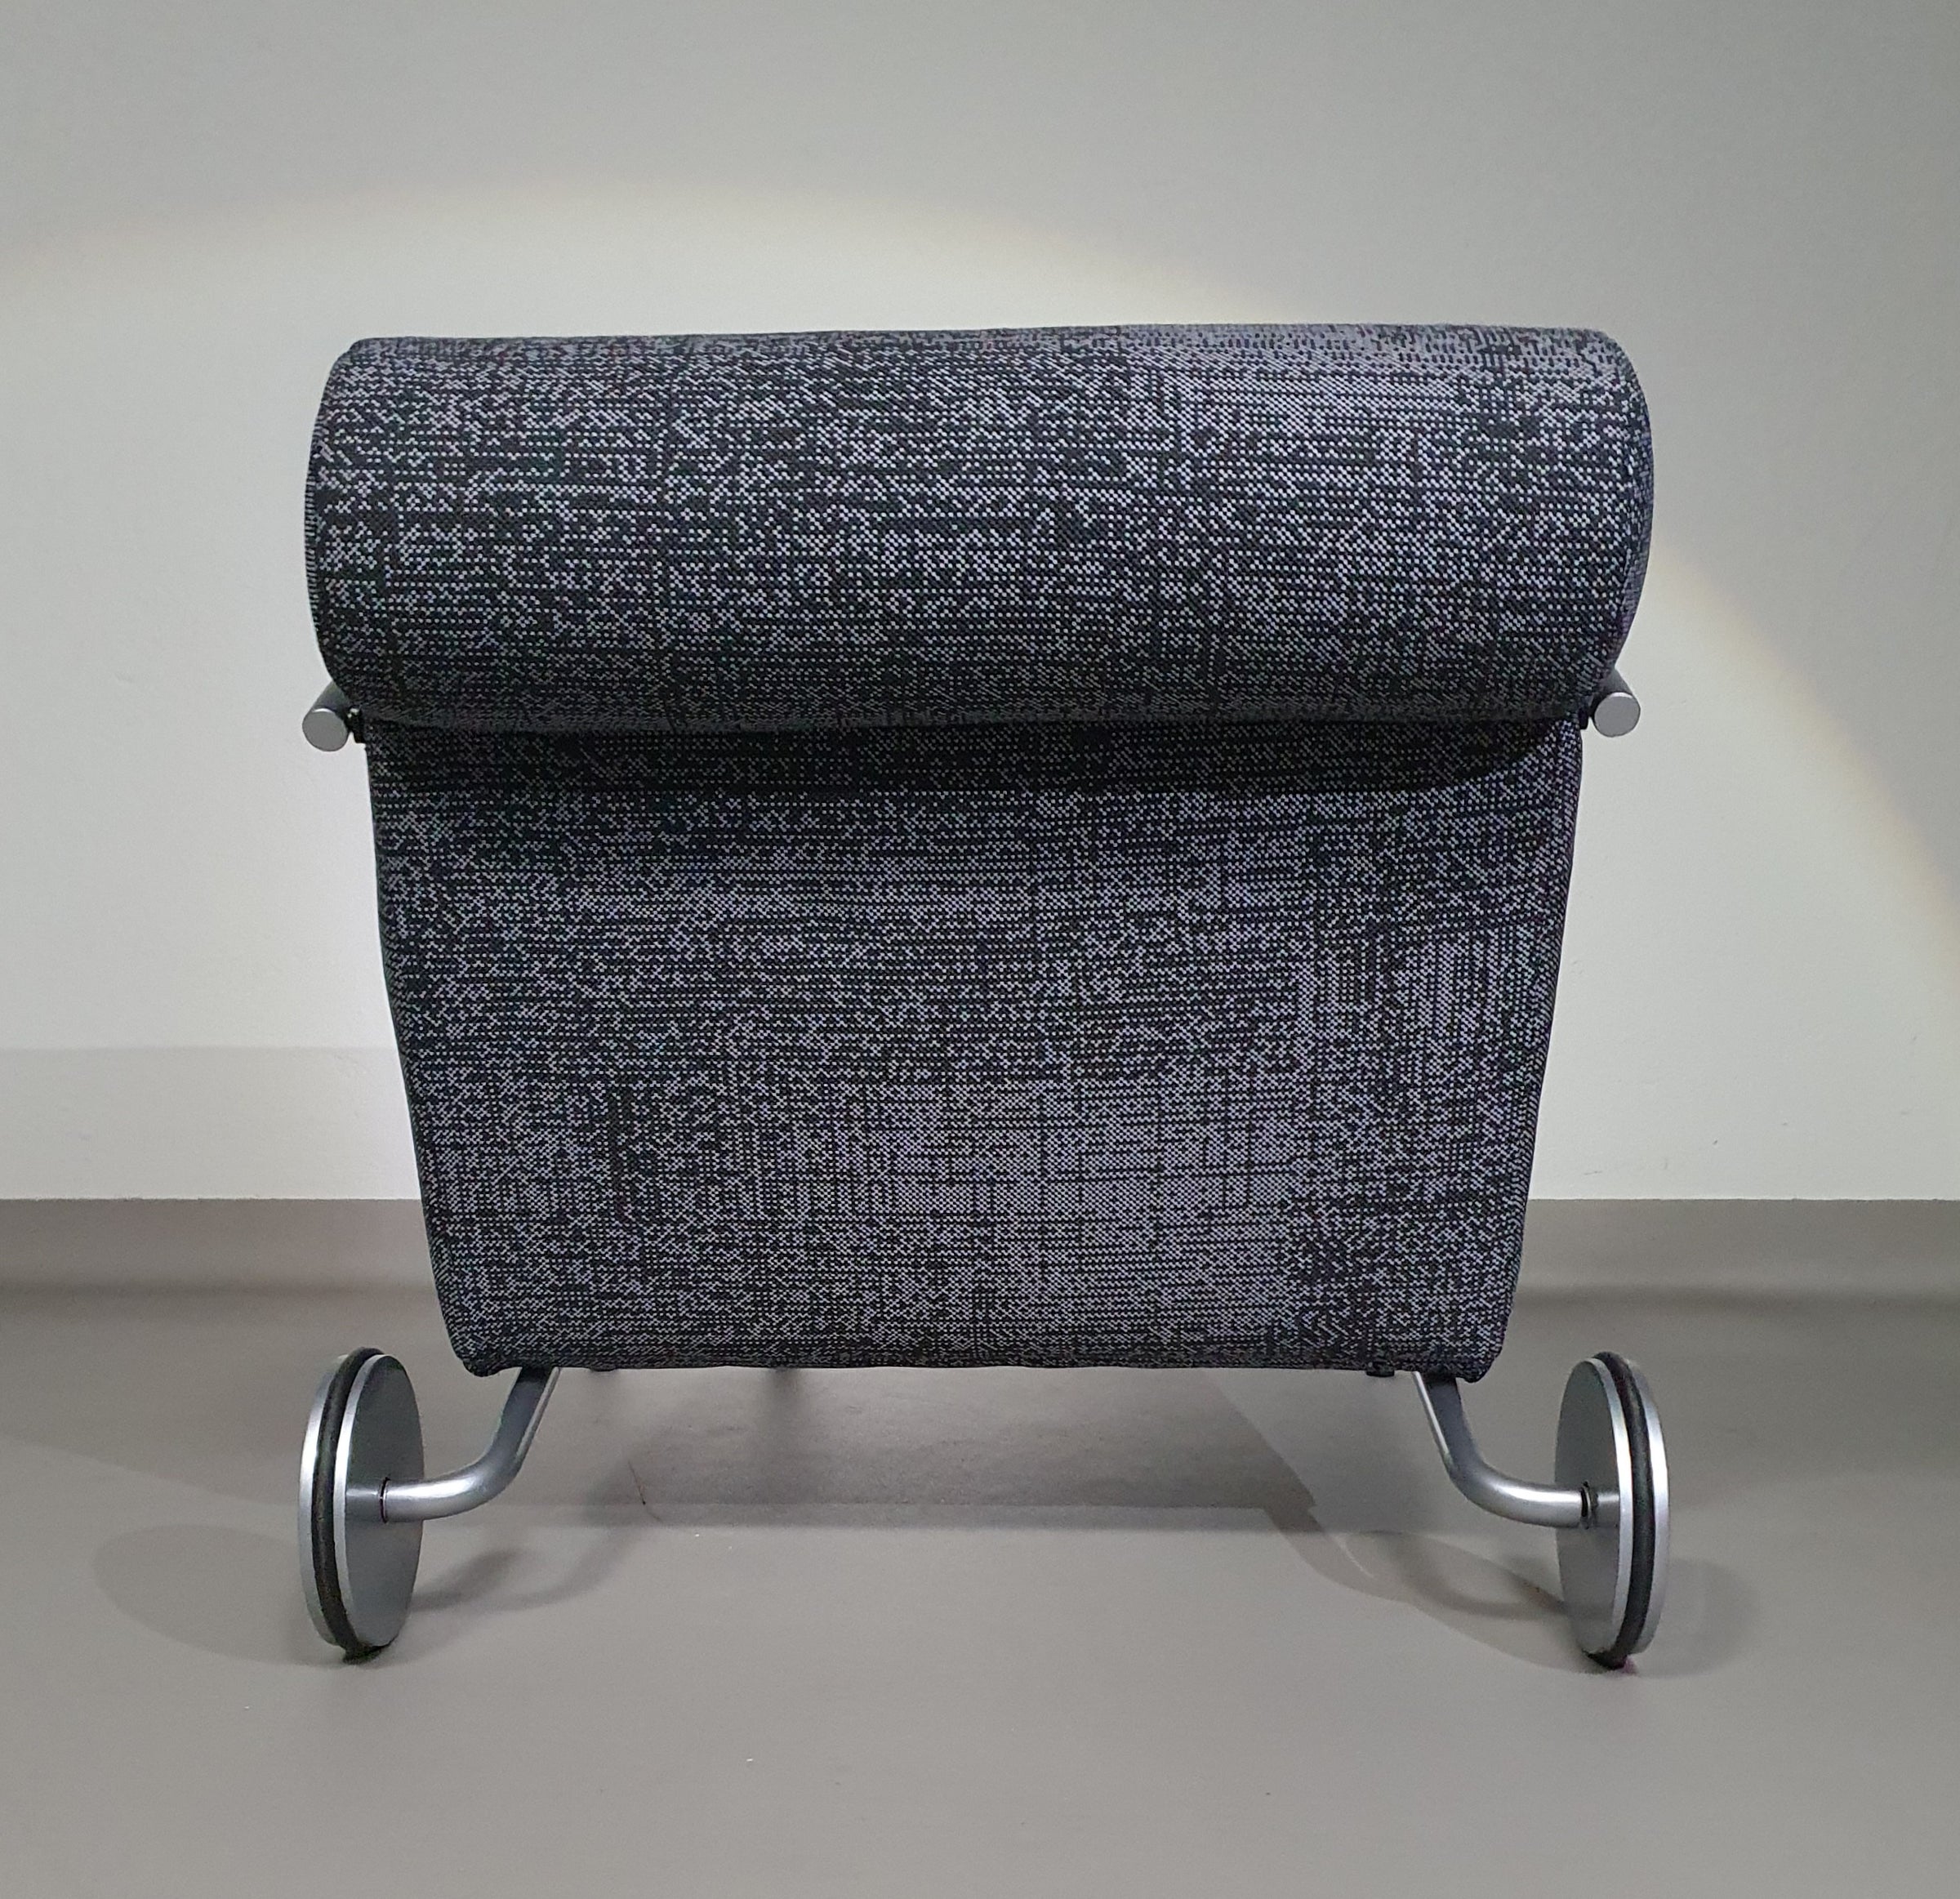 Vintage "zyklus" arm chair  by Peter Maly for Cor, Germany 1980s